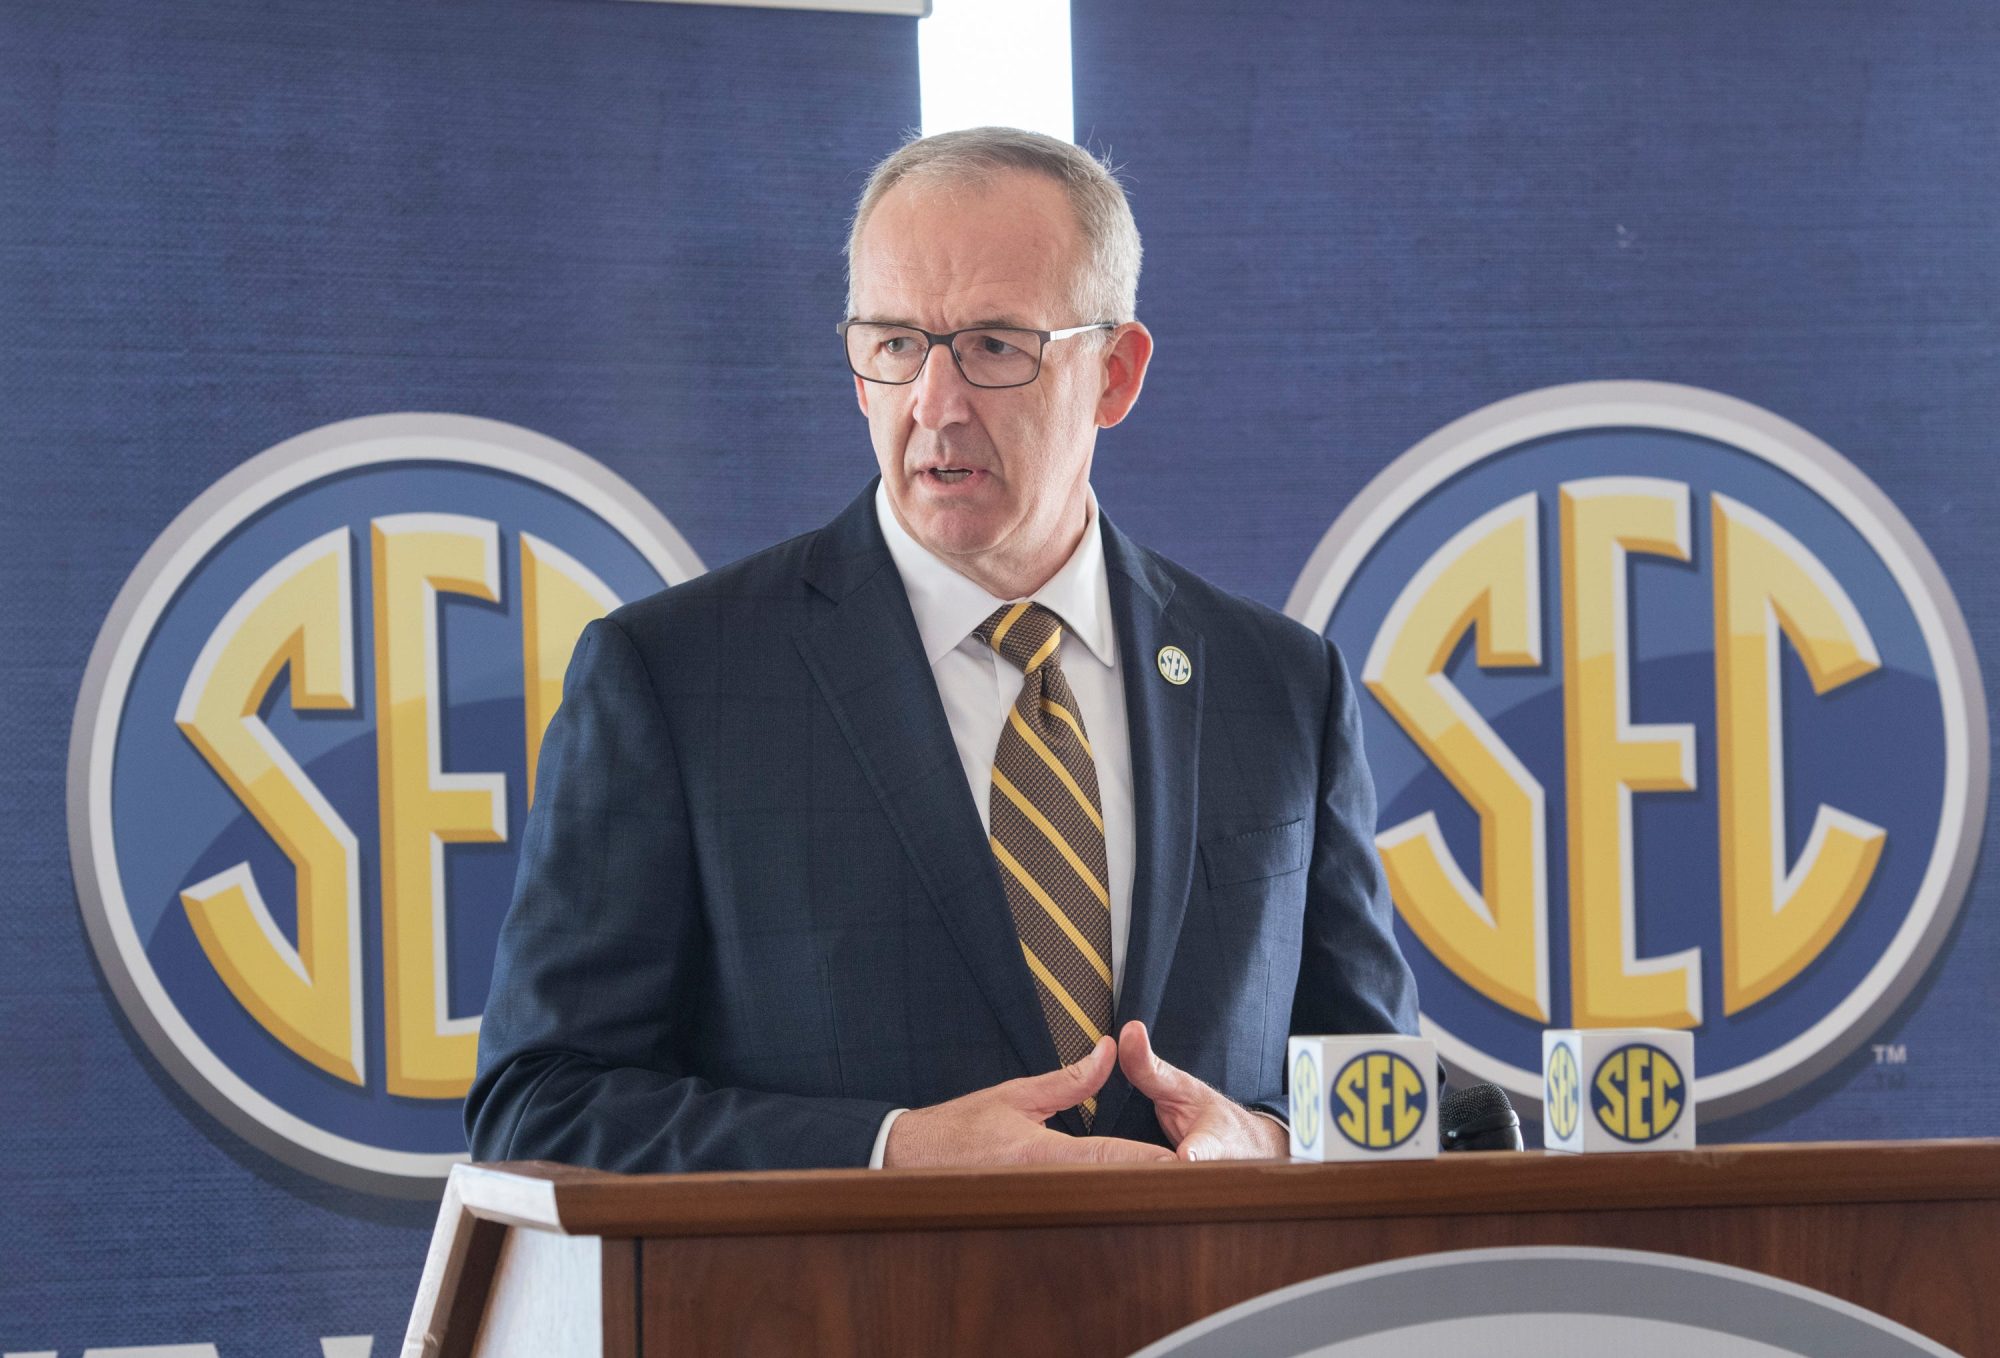 Southeastern Conference Commissioner Greg Sankey announces that Pensacola's Ashton Bronshanham Soccer Complex will be the new home of the SEC Women's Soccer Tournament during a press conference in Pensacola Beach on Wednesday, Feb. 23, 2022. Sec Presser